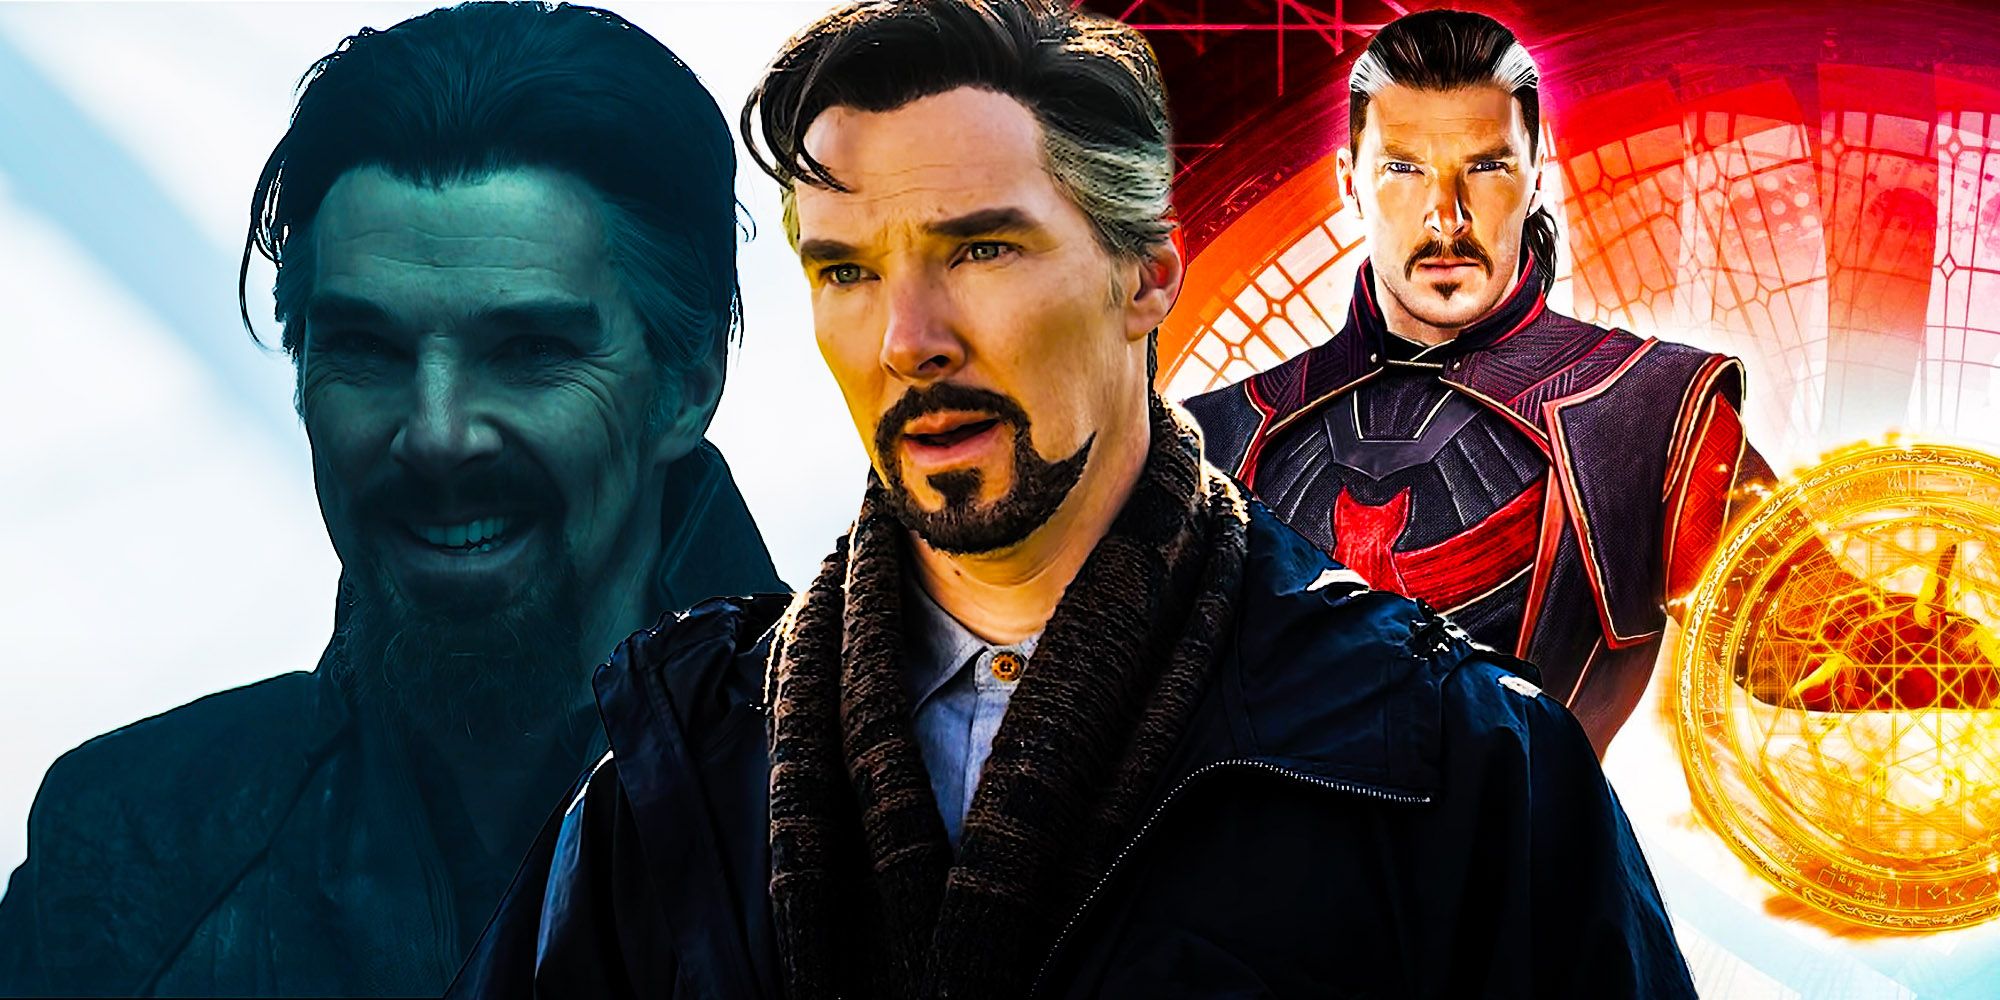 All 3 versions of Doctor strange in the multiverse of madness